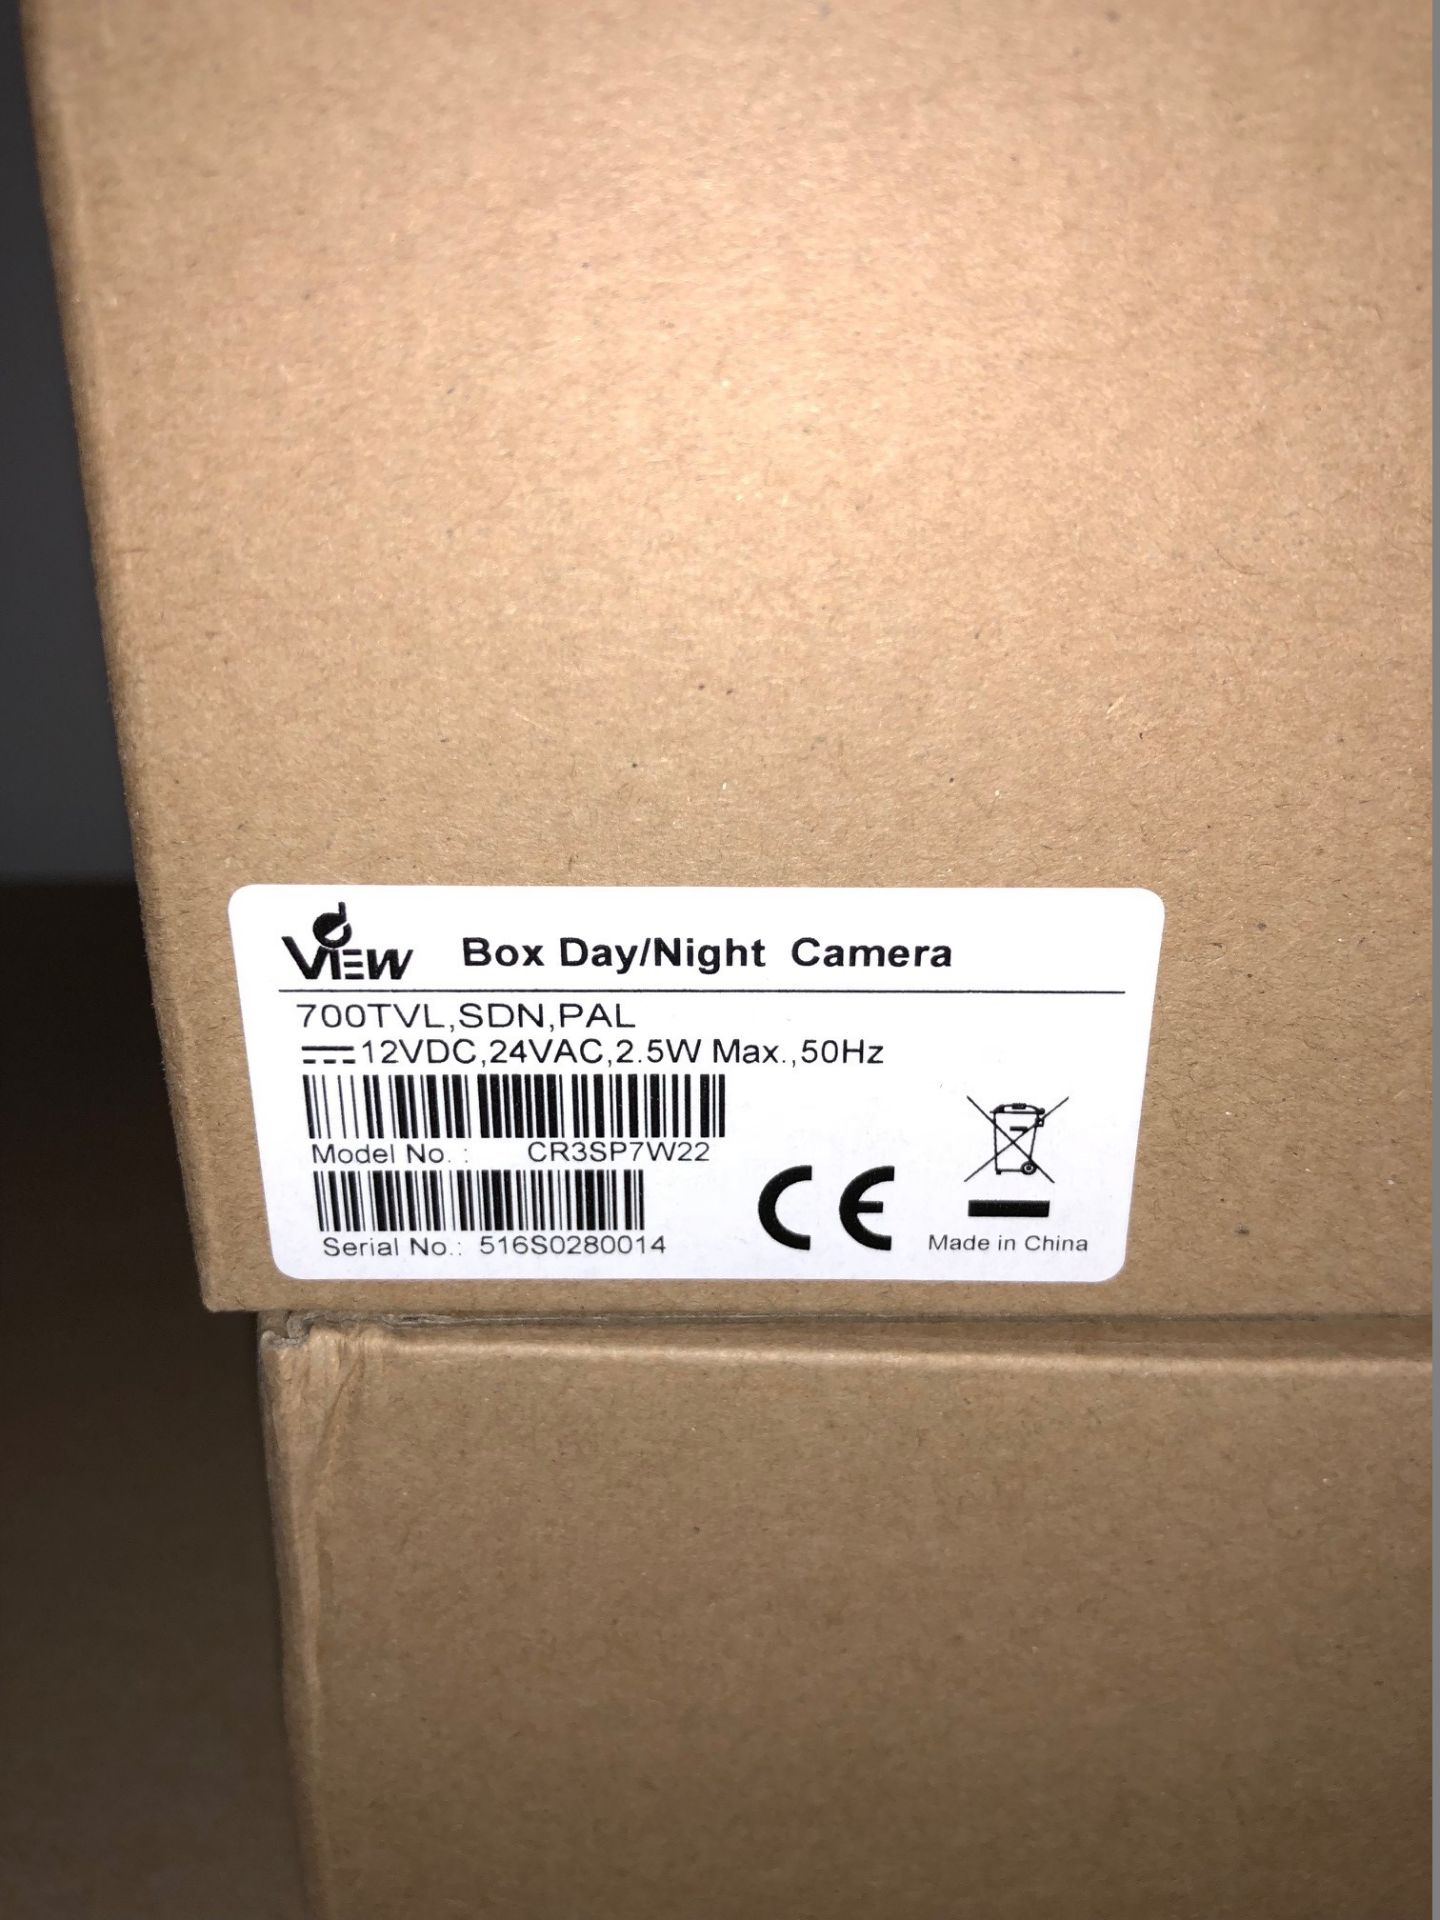 4 x dView Day/Night Cameras - 700TVL. SDN, PAL - Model CR3SP7W22 (Brand New & Boxed) - Image 2 of 3